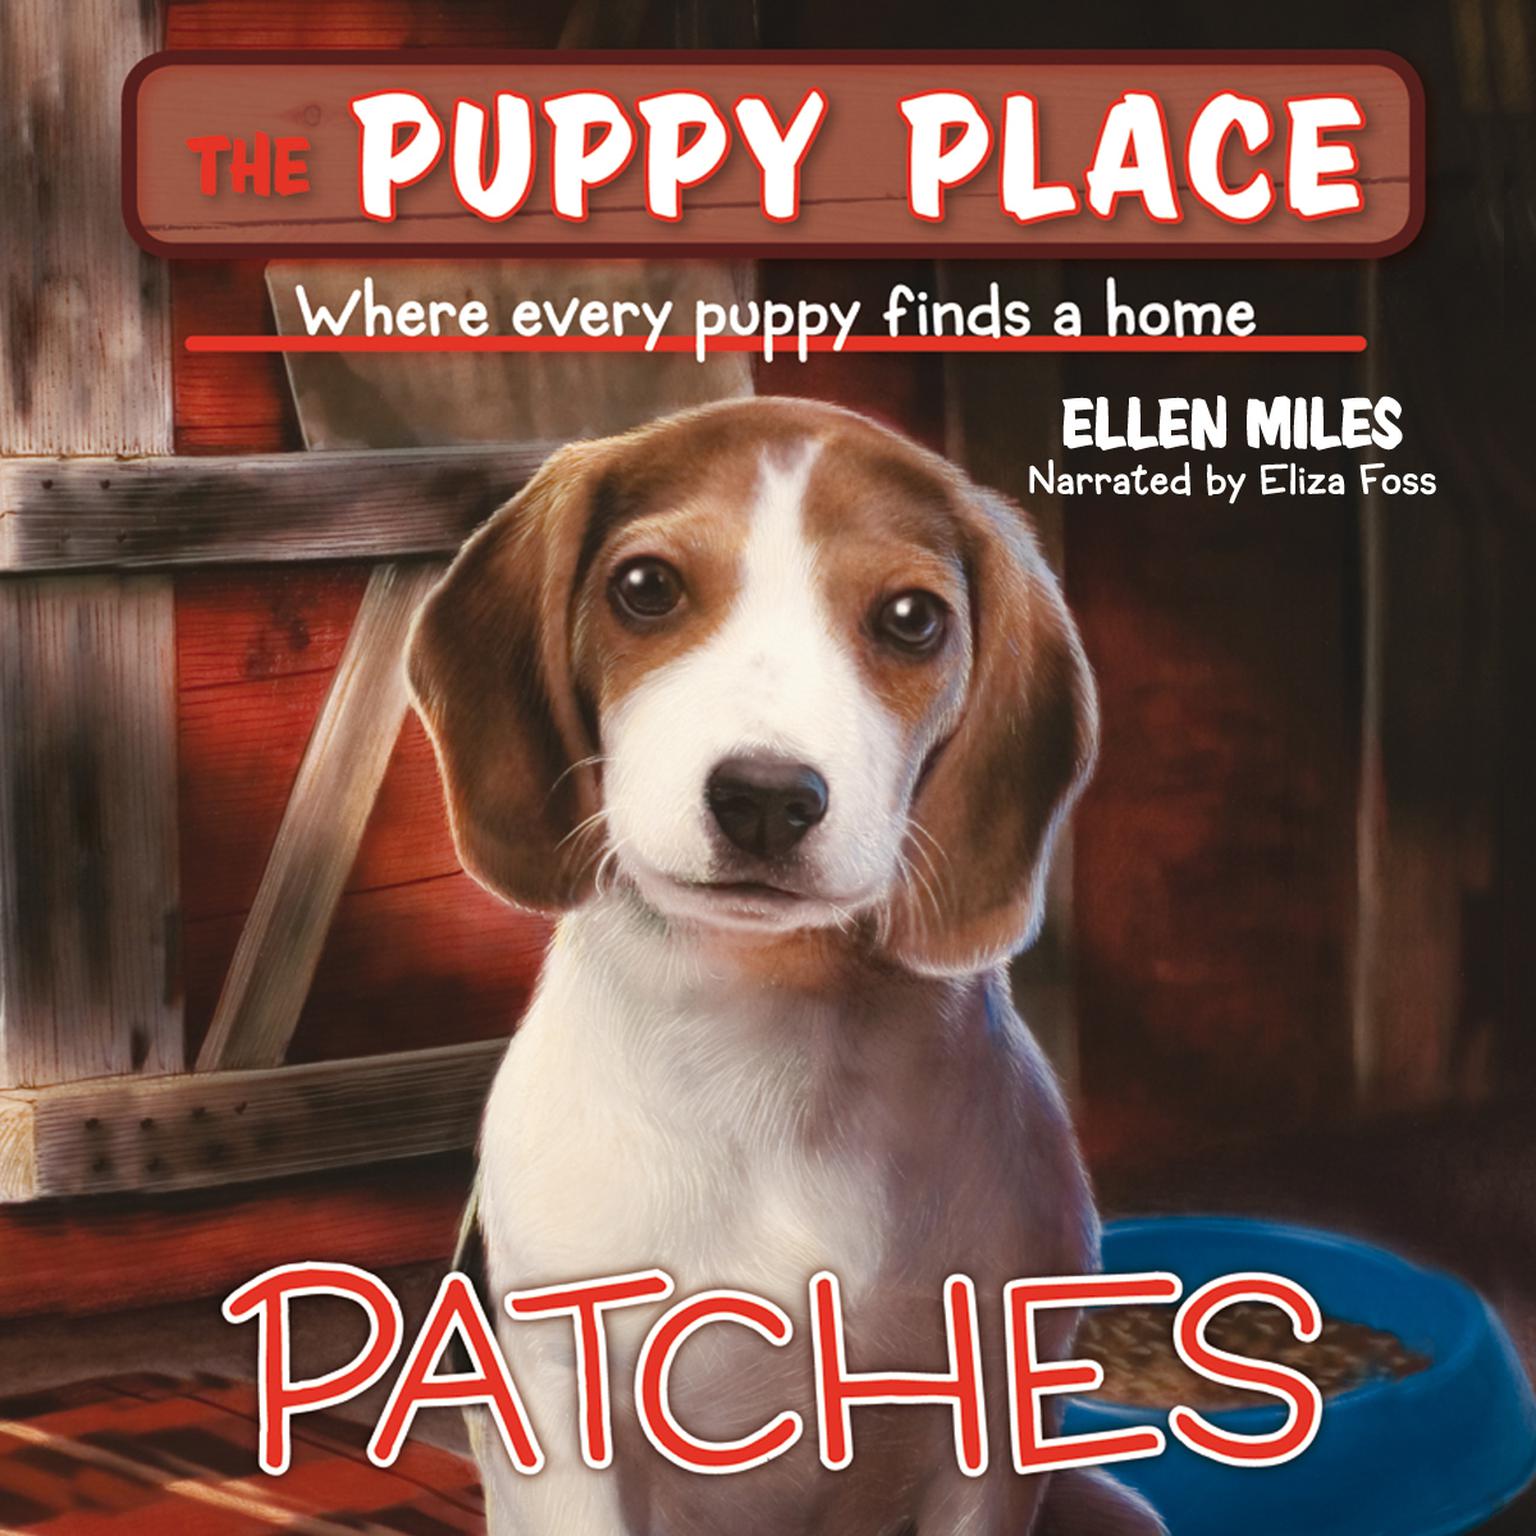 Patches (The Puppy Place #8): Puppy Place:#8 Patches Digital Download Audiobook, by Ellen Miles